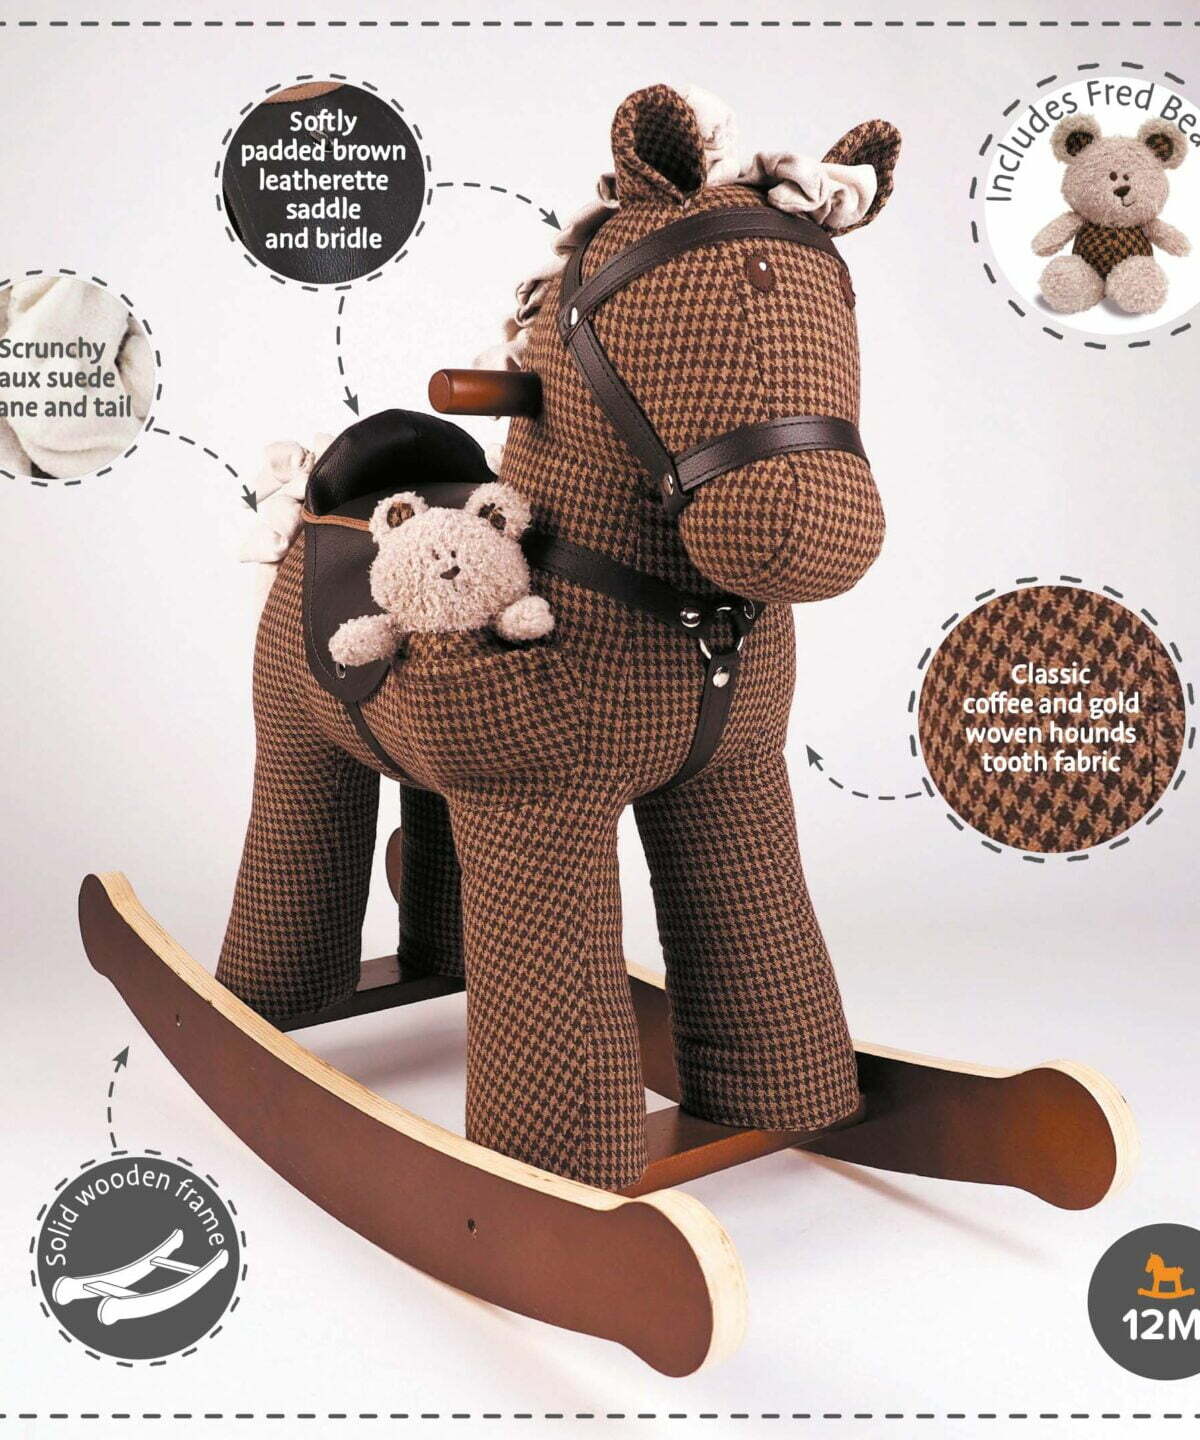 Features and benefits displayed for Chester & Fred Rocking Horse